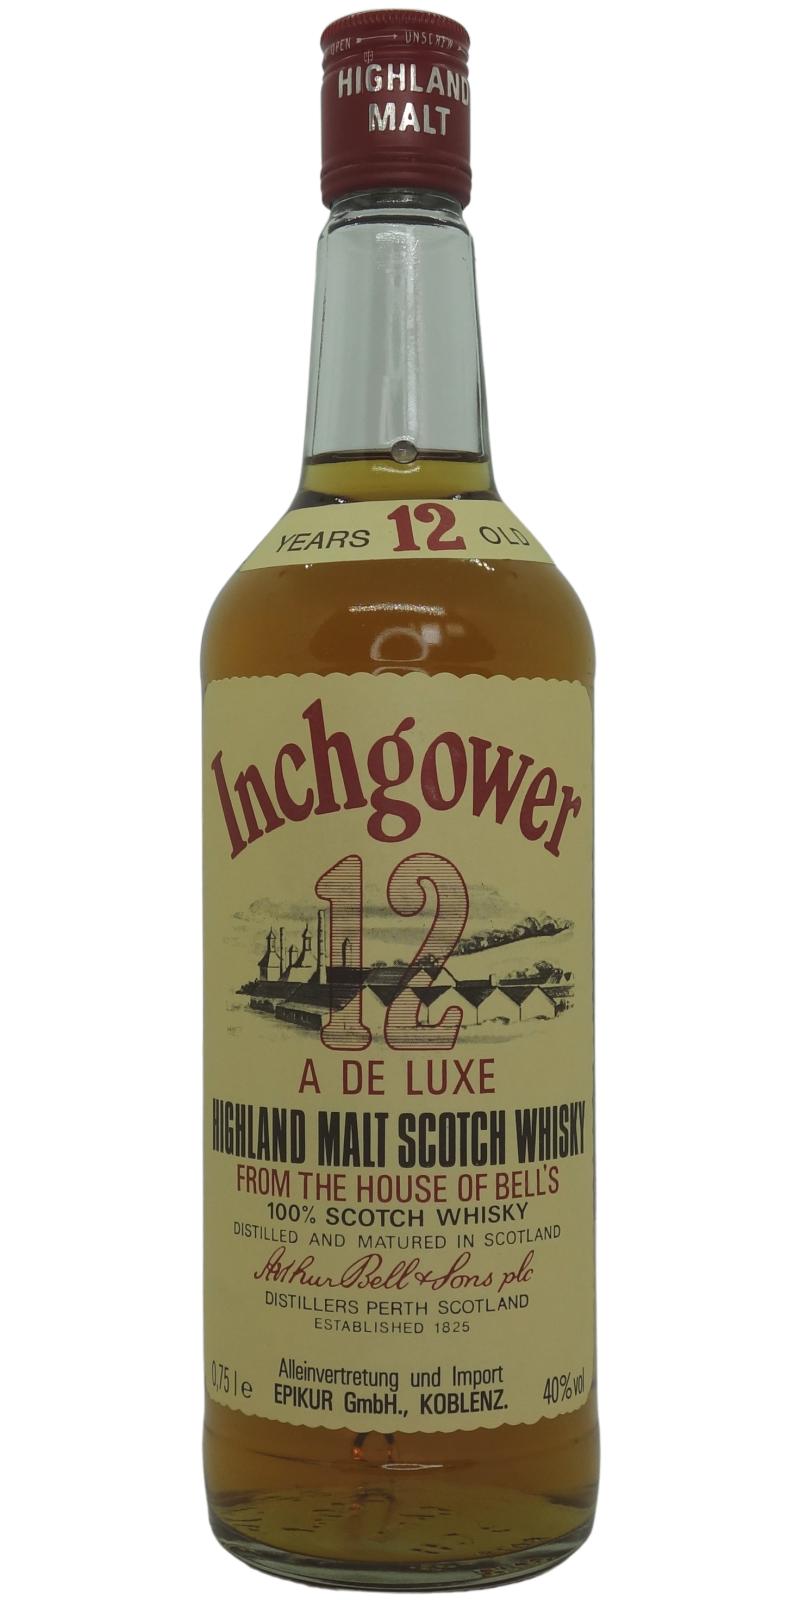 Inchgower 12yo A De Luxe Highland Malt Scotch Whisky from the House of Bell's Epikur GmbH. Koblenz 40% 750ml